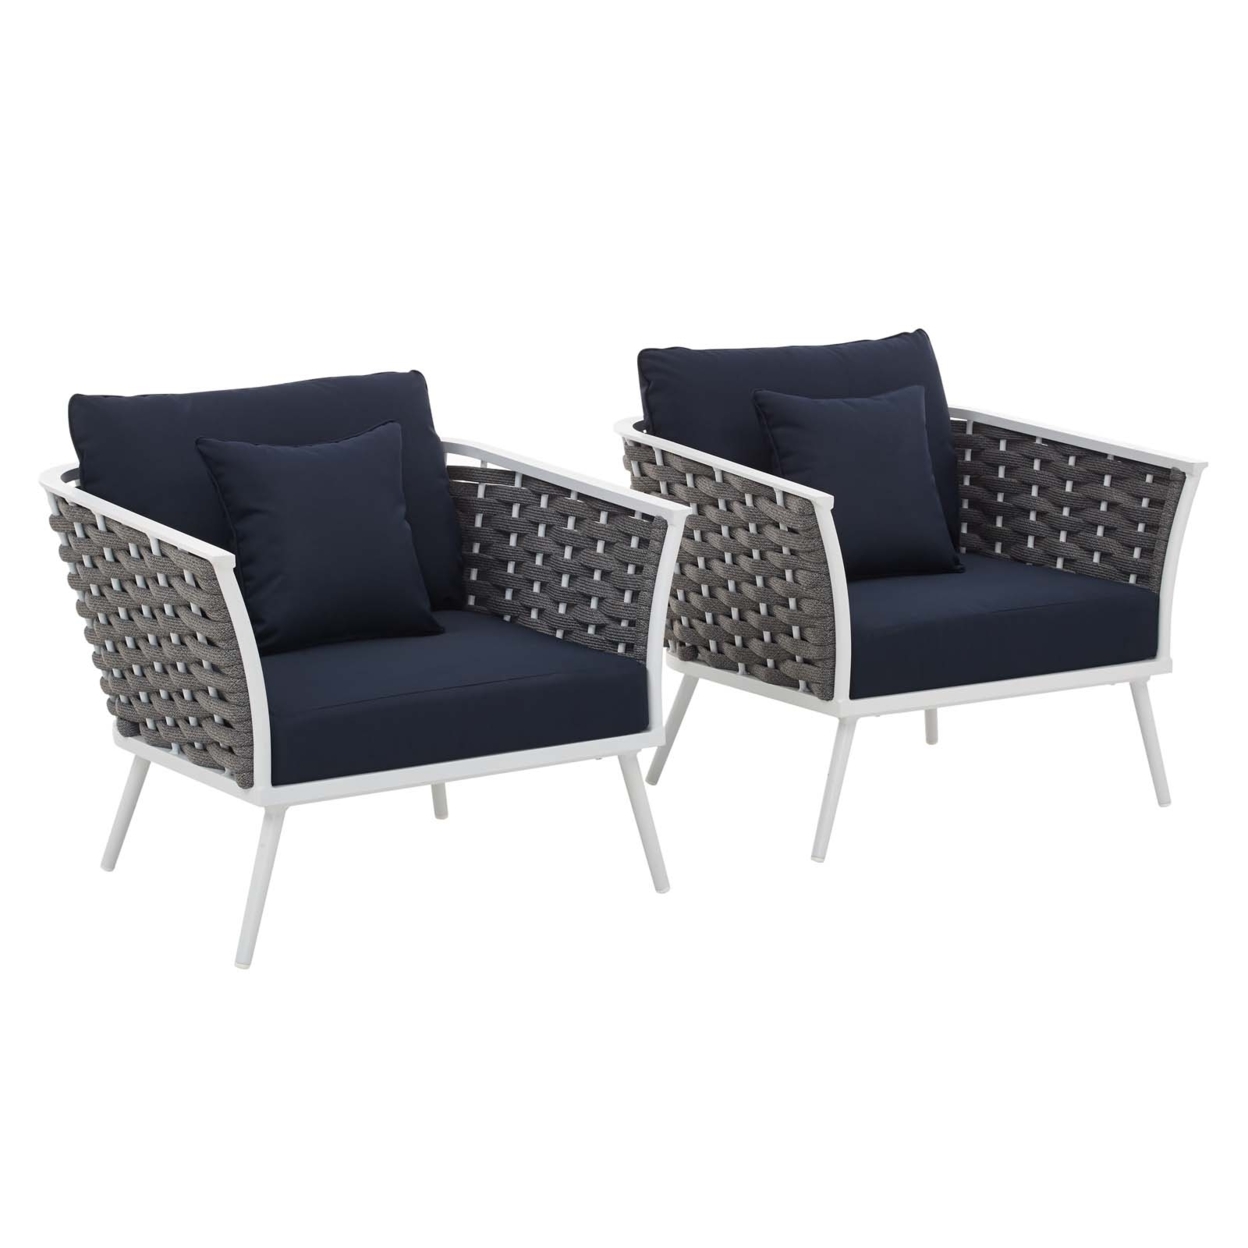 Stance Armchair Outdoor Patio Aluminum Set Of 2,White Navy